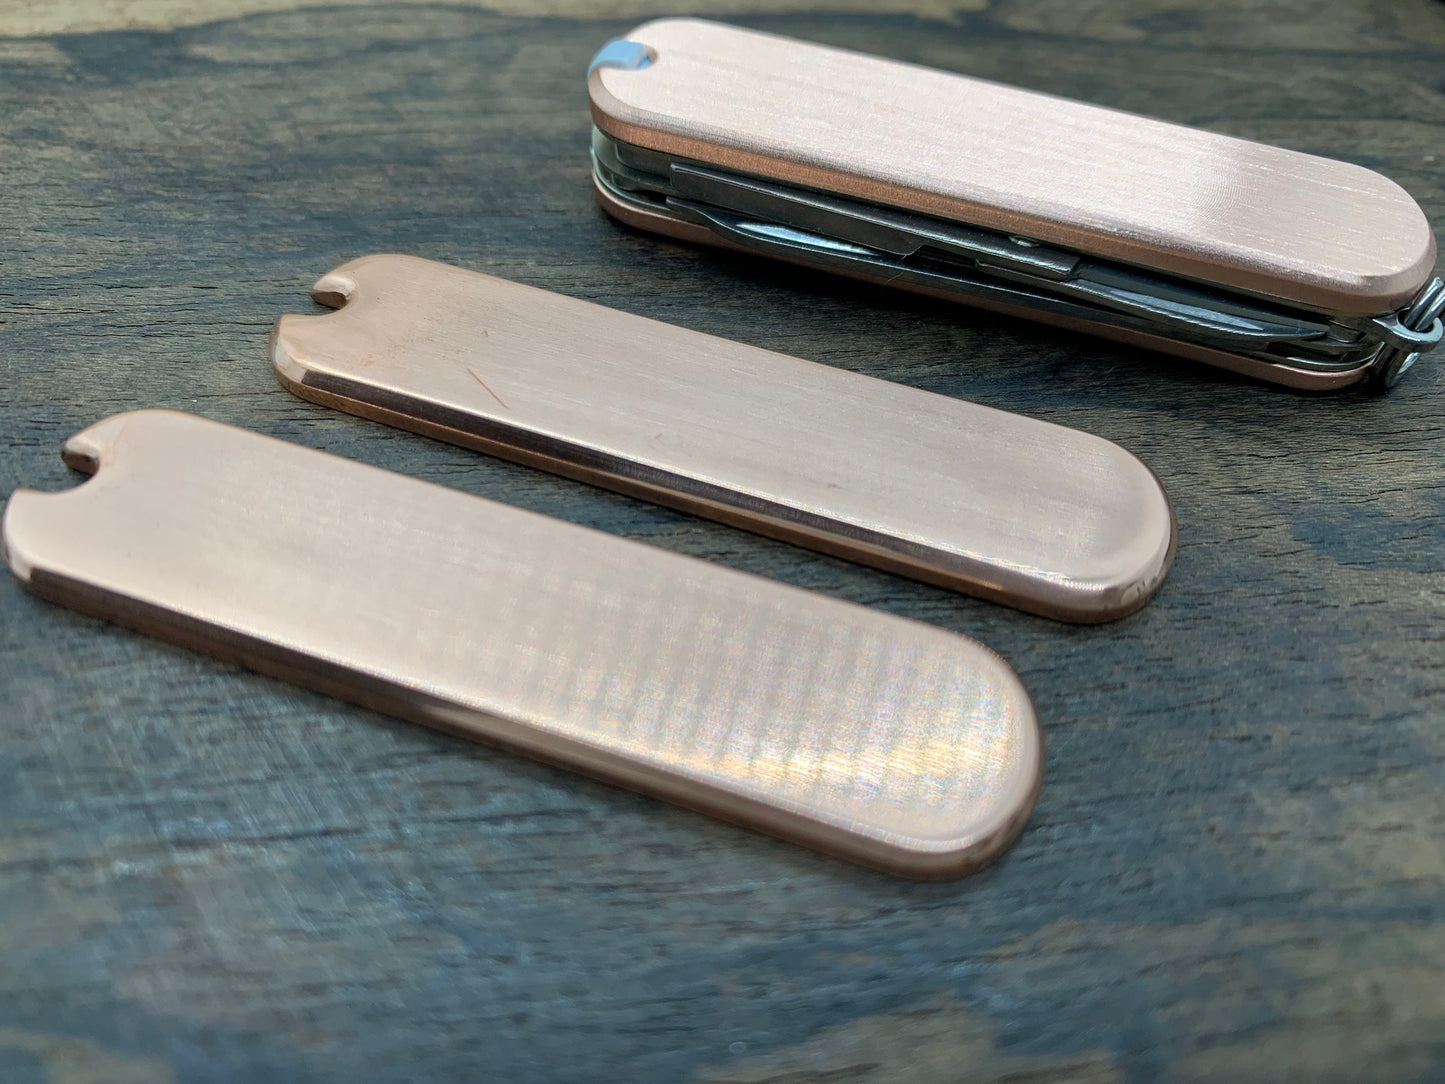 58mm Brushed Titanium Scales for Swiss Army SAK